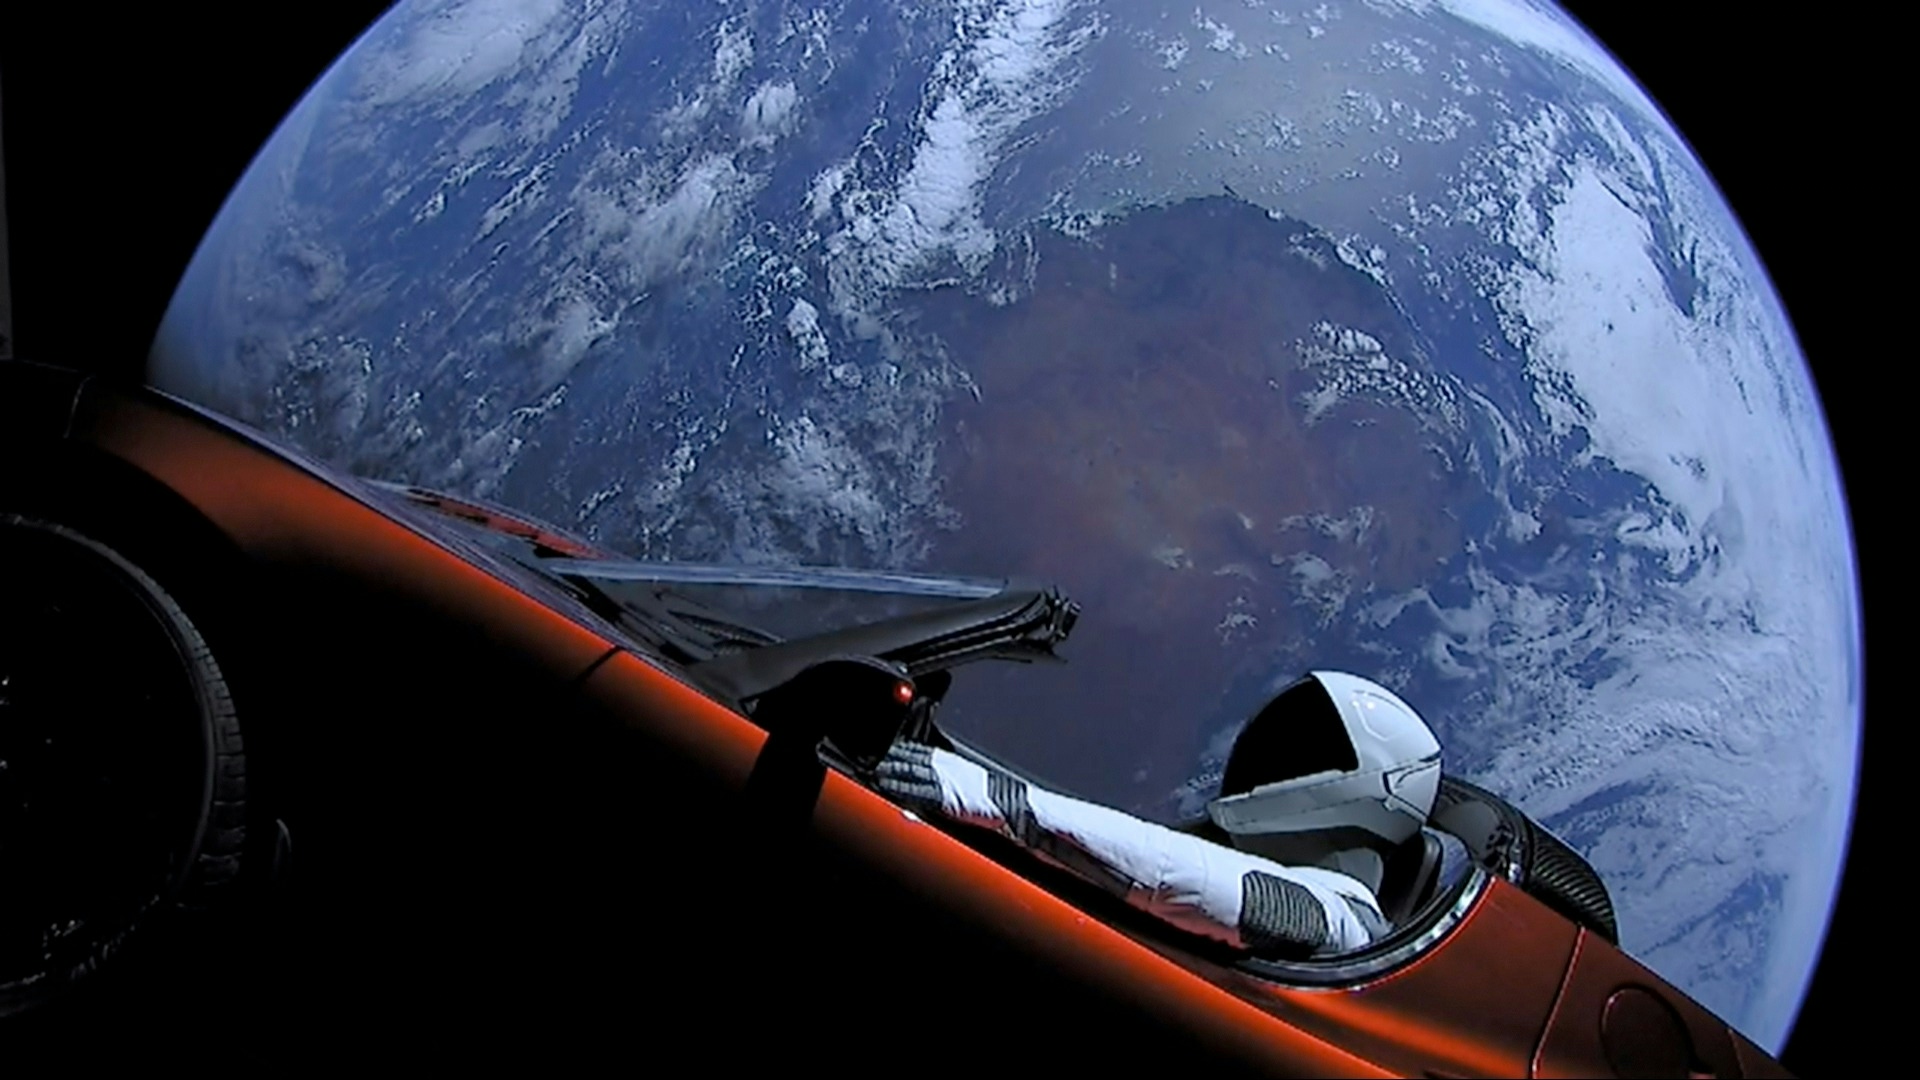 Tesla roadster launched from the Falcon Heavy rocket with a dummy driver named "Starman" heads towards Mars.